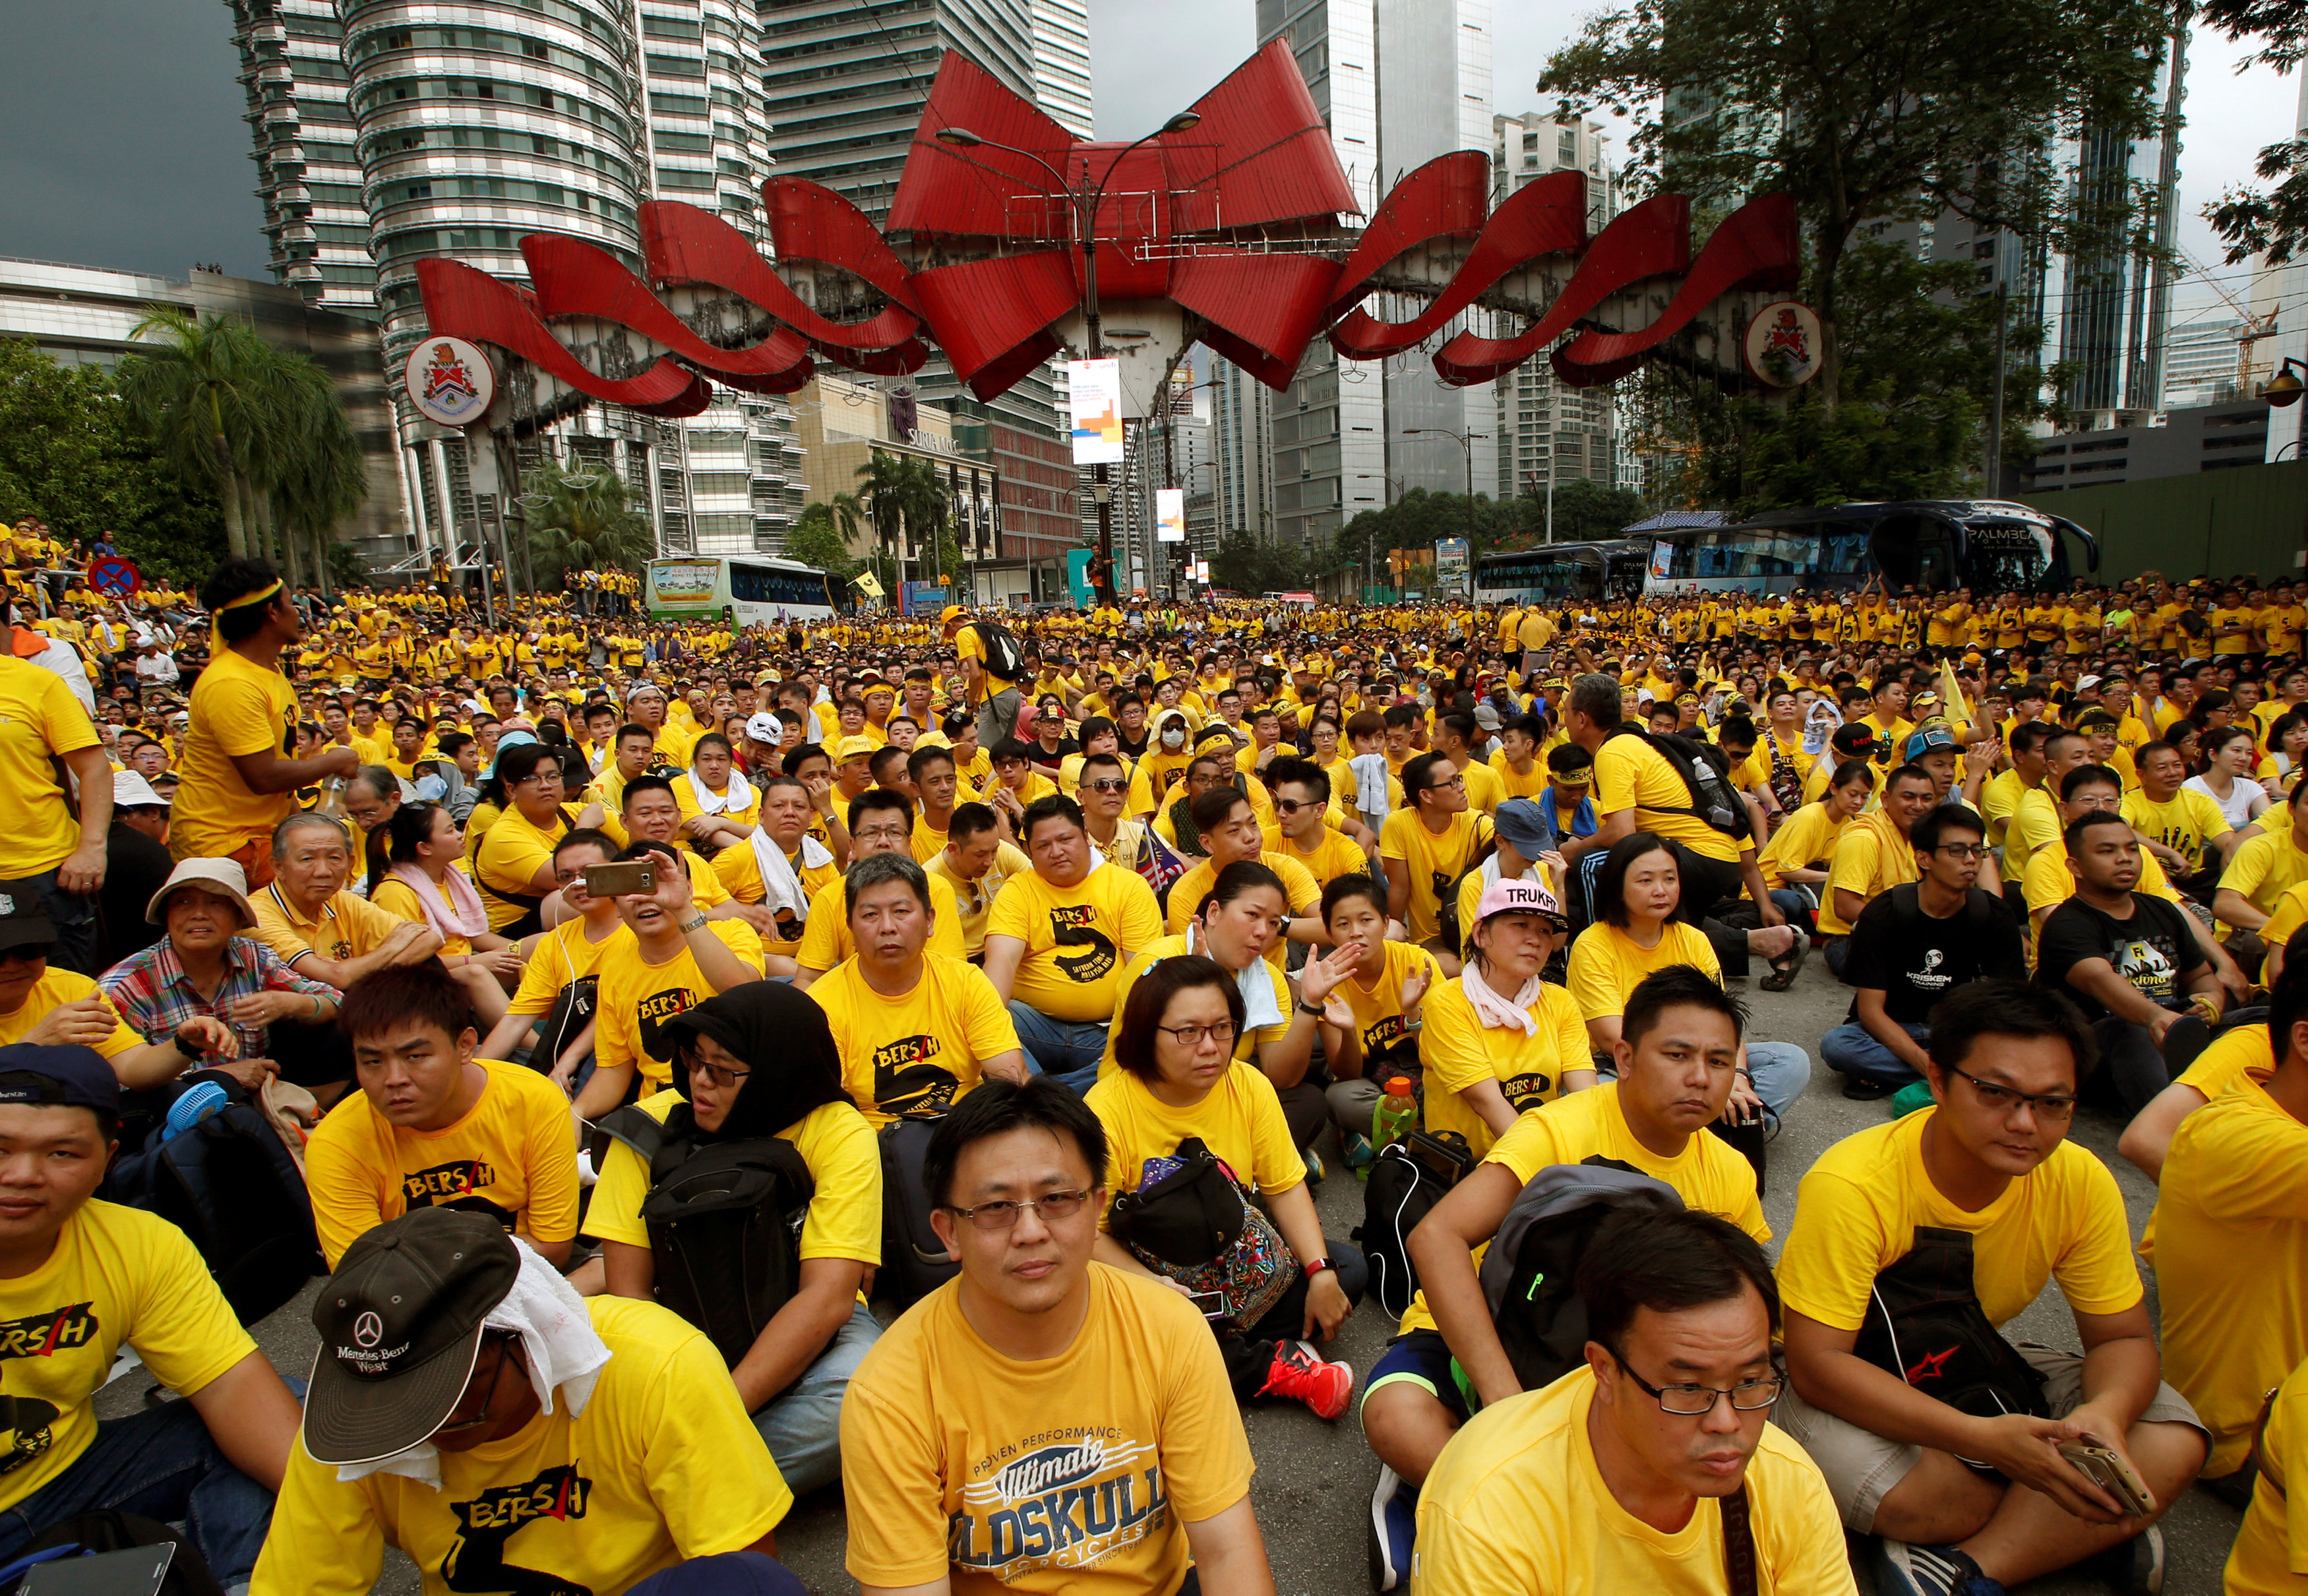 Members of pro-democracy group Bersih listen to former Malaysian prime minister Mahathir Mohammad at a rally during a 1MDB protest, calling for Prime Minister Najib Abdul Razak to resign, in Kuala Lumpur, MalaysiaNovember 19, 2016. REUTERS/Edgar Sun